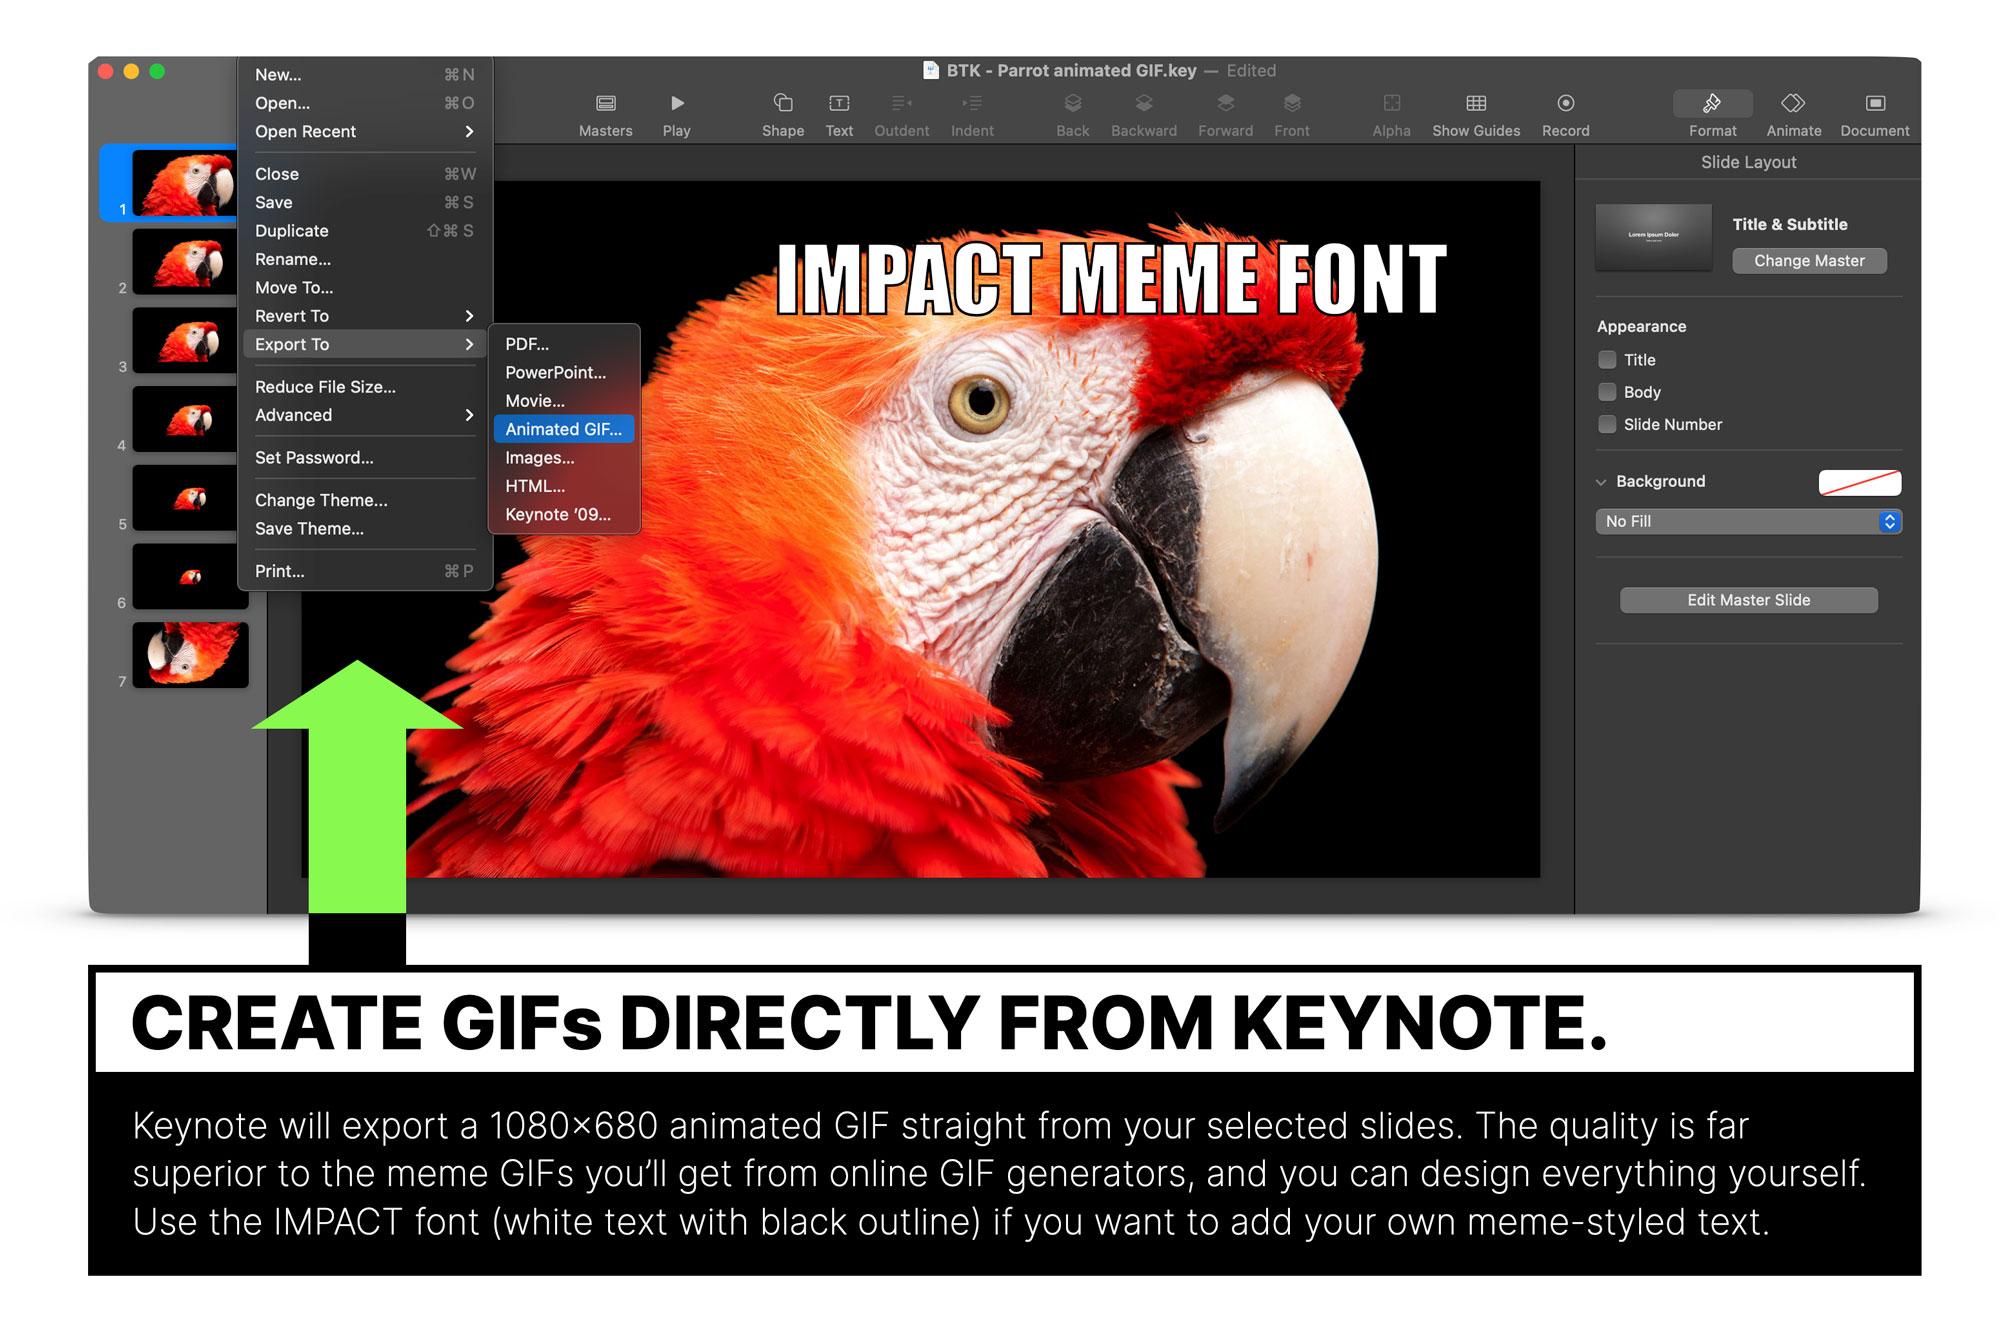 How to create animated GIFs in Keynote